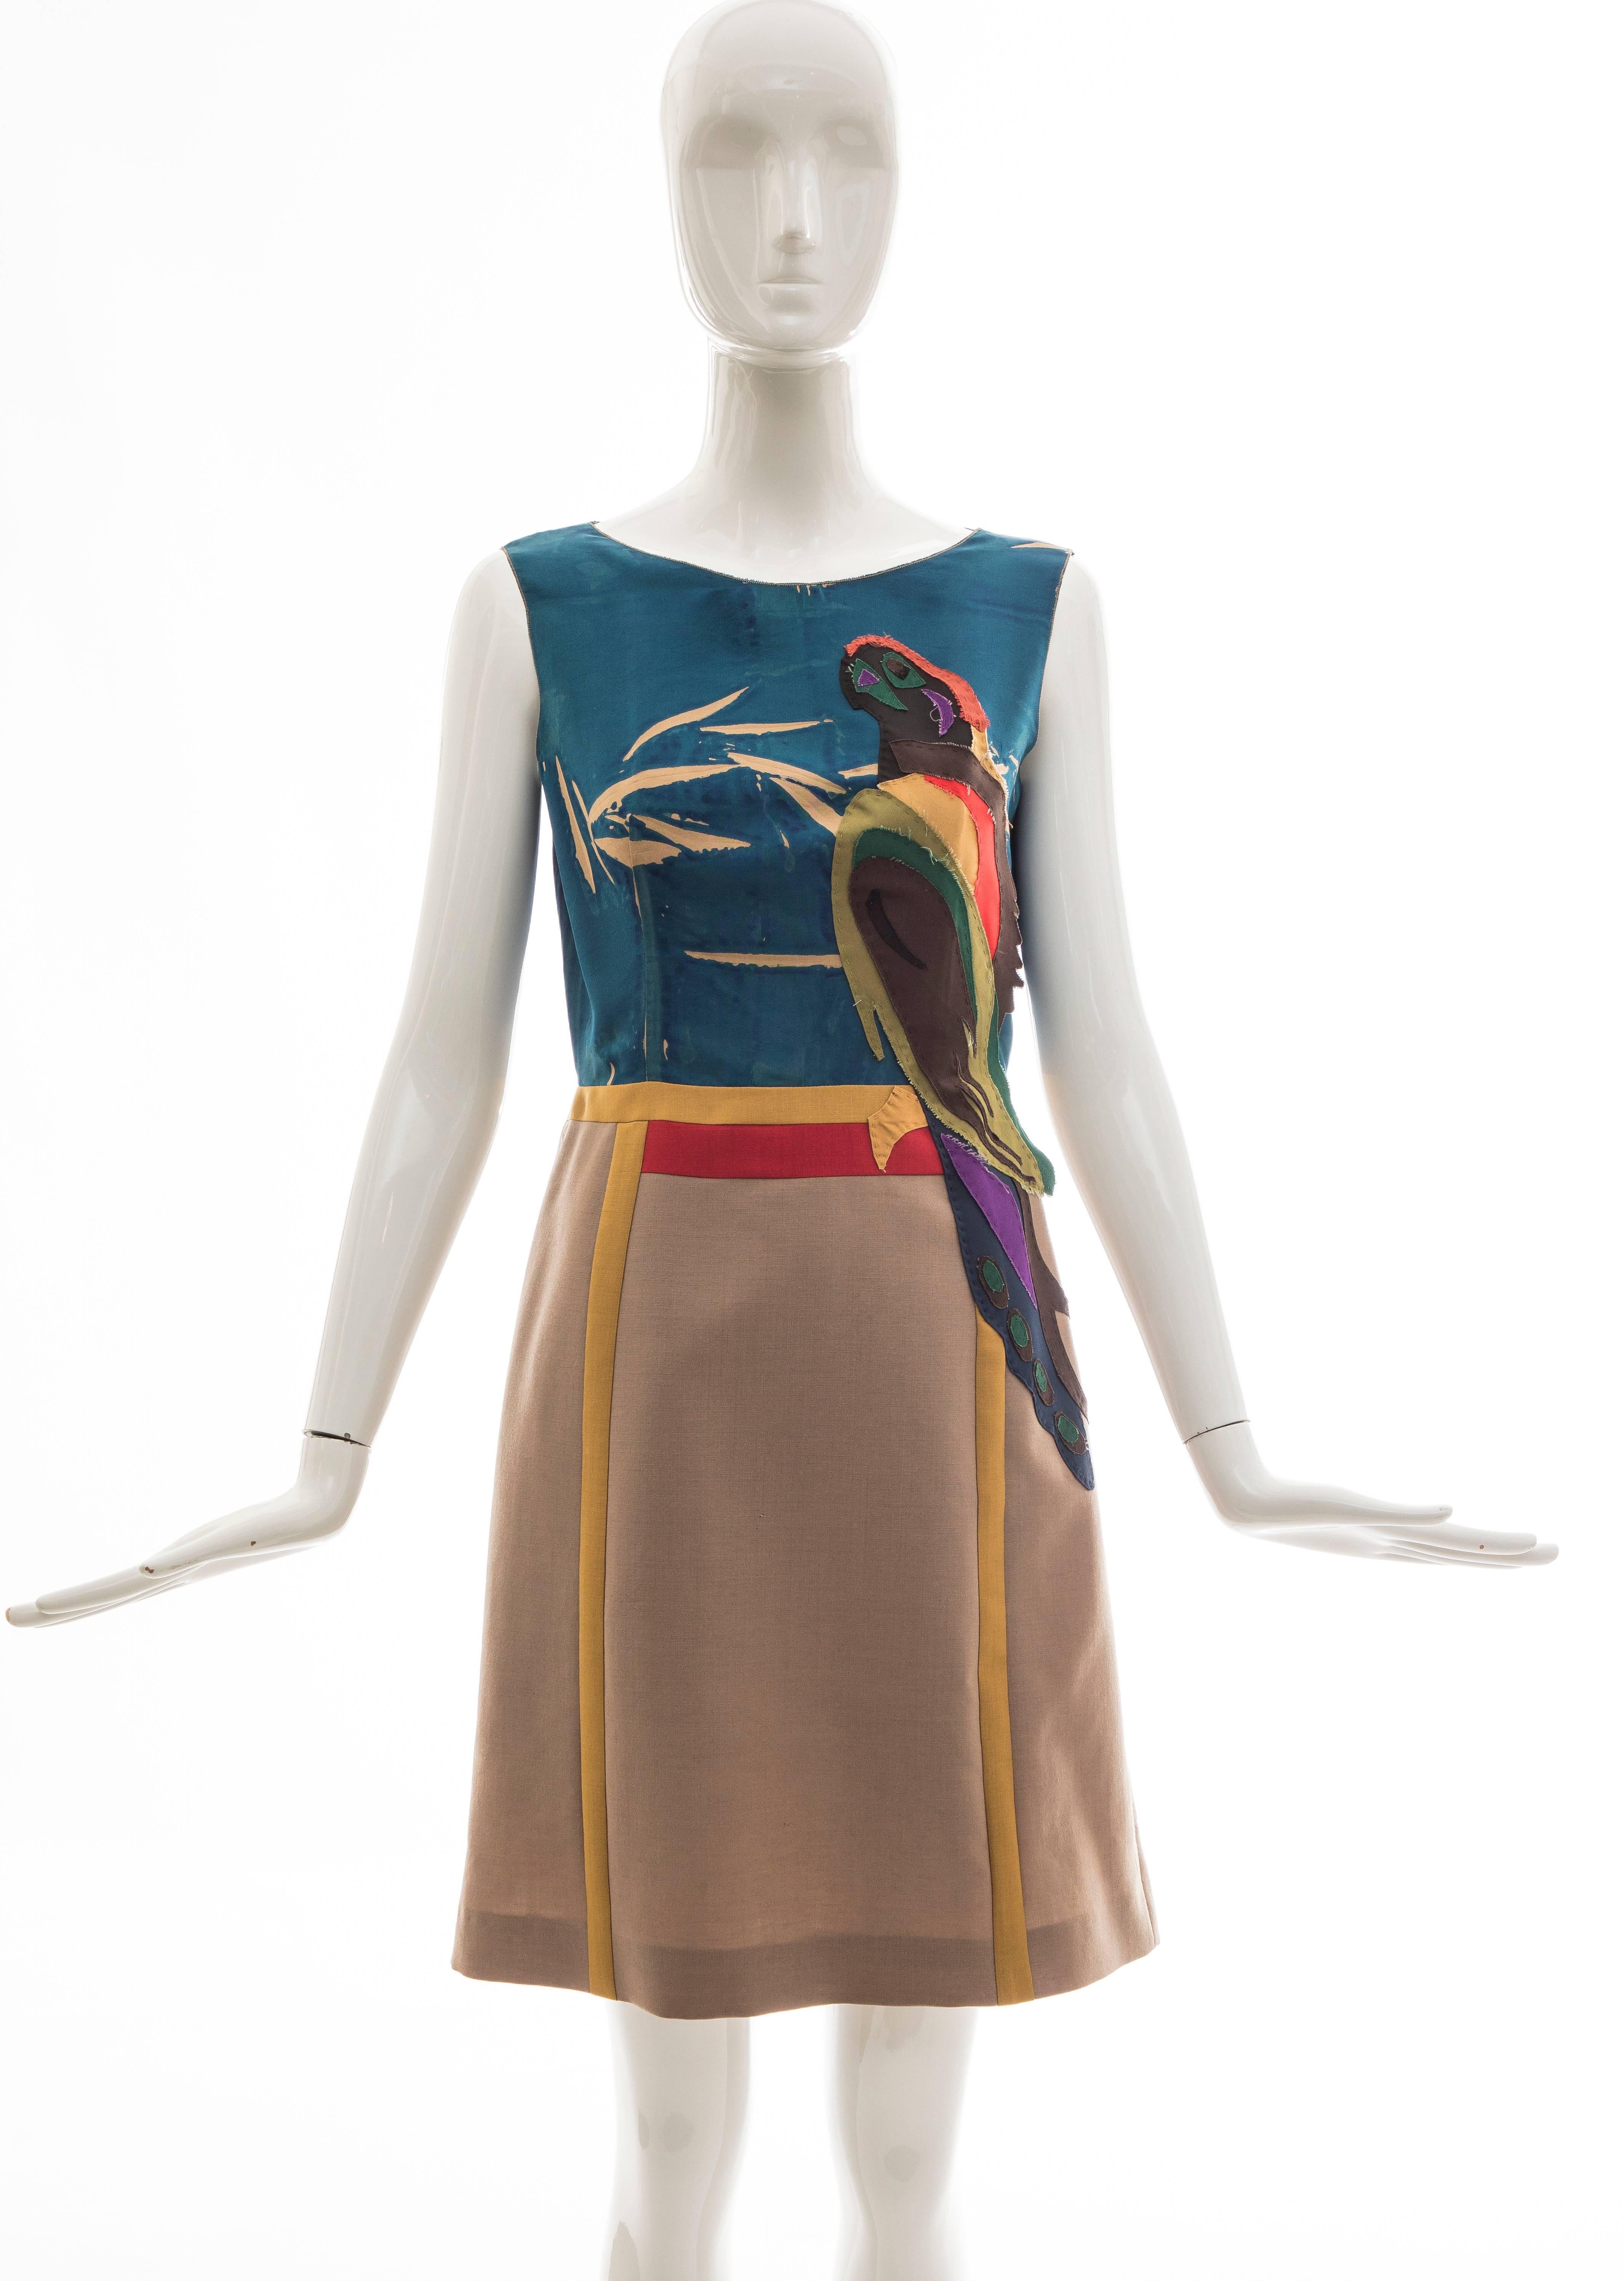 Prada, Spring 2005, sleeveless silk dress with applique parrot motif, wool skirt, fully lined and conceal
Fabric Content: 100% Silk; Bottom 60% Mohair, 40% Wool; Applications 100% Silk

IT. 42, US. 6
Bust 34, Waist 27, Hips 40, Length36, Shoulder 14